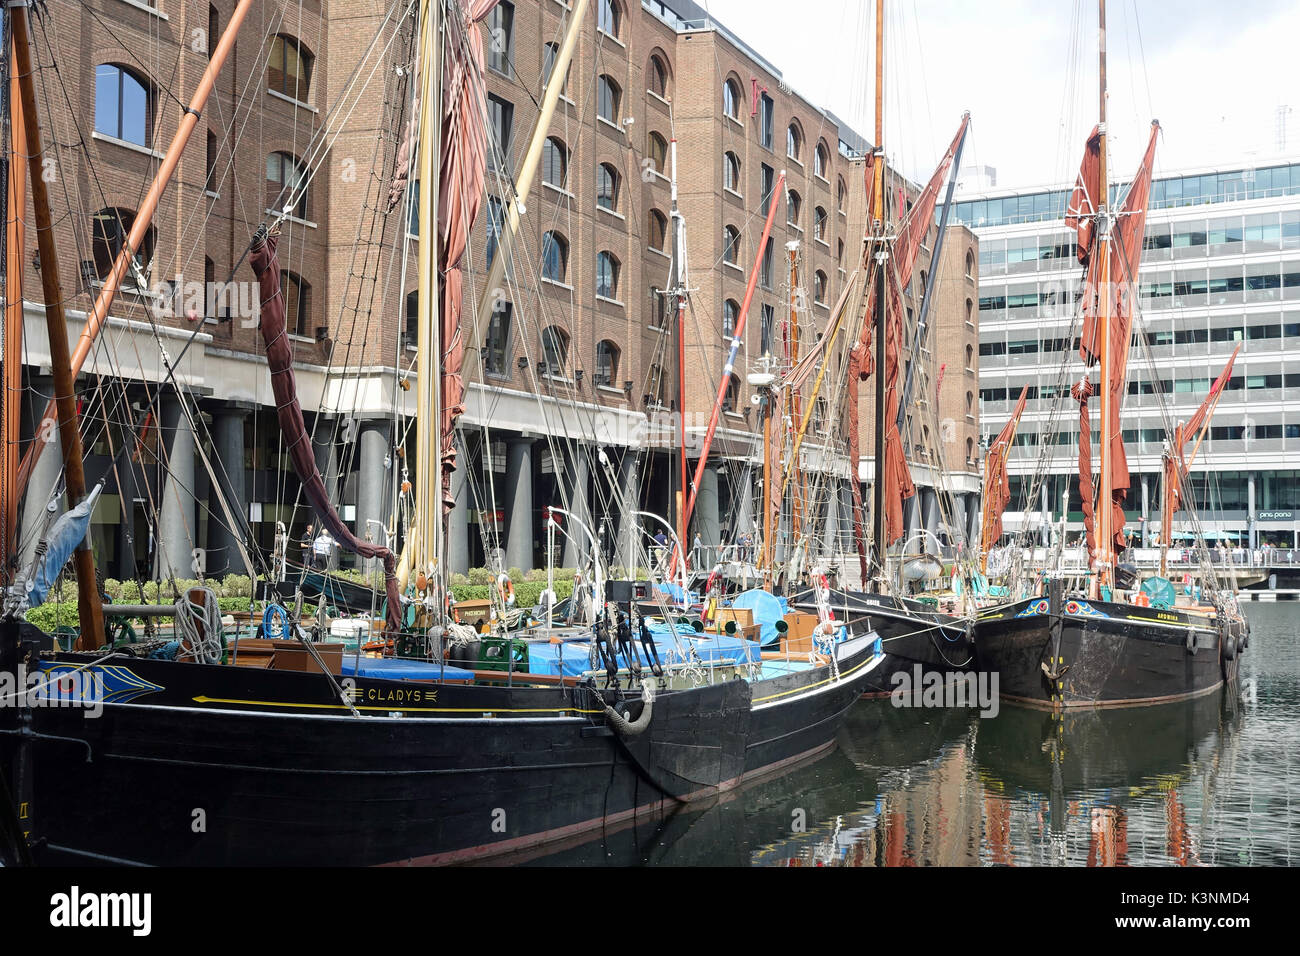 View of Thames Sailing Barges moored in St Katharine Docks in Central London UK Stock Photo